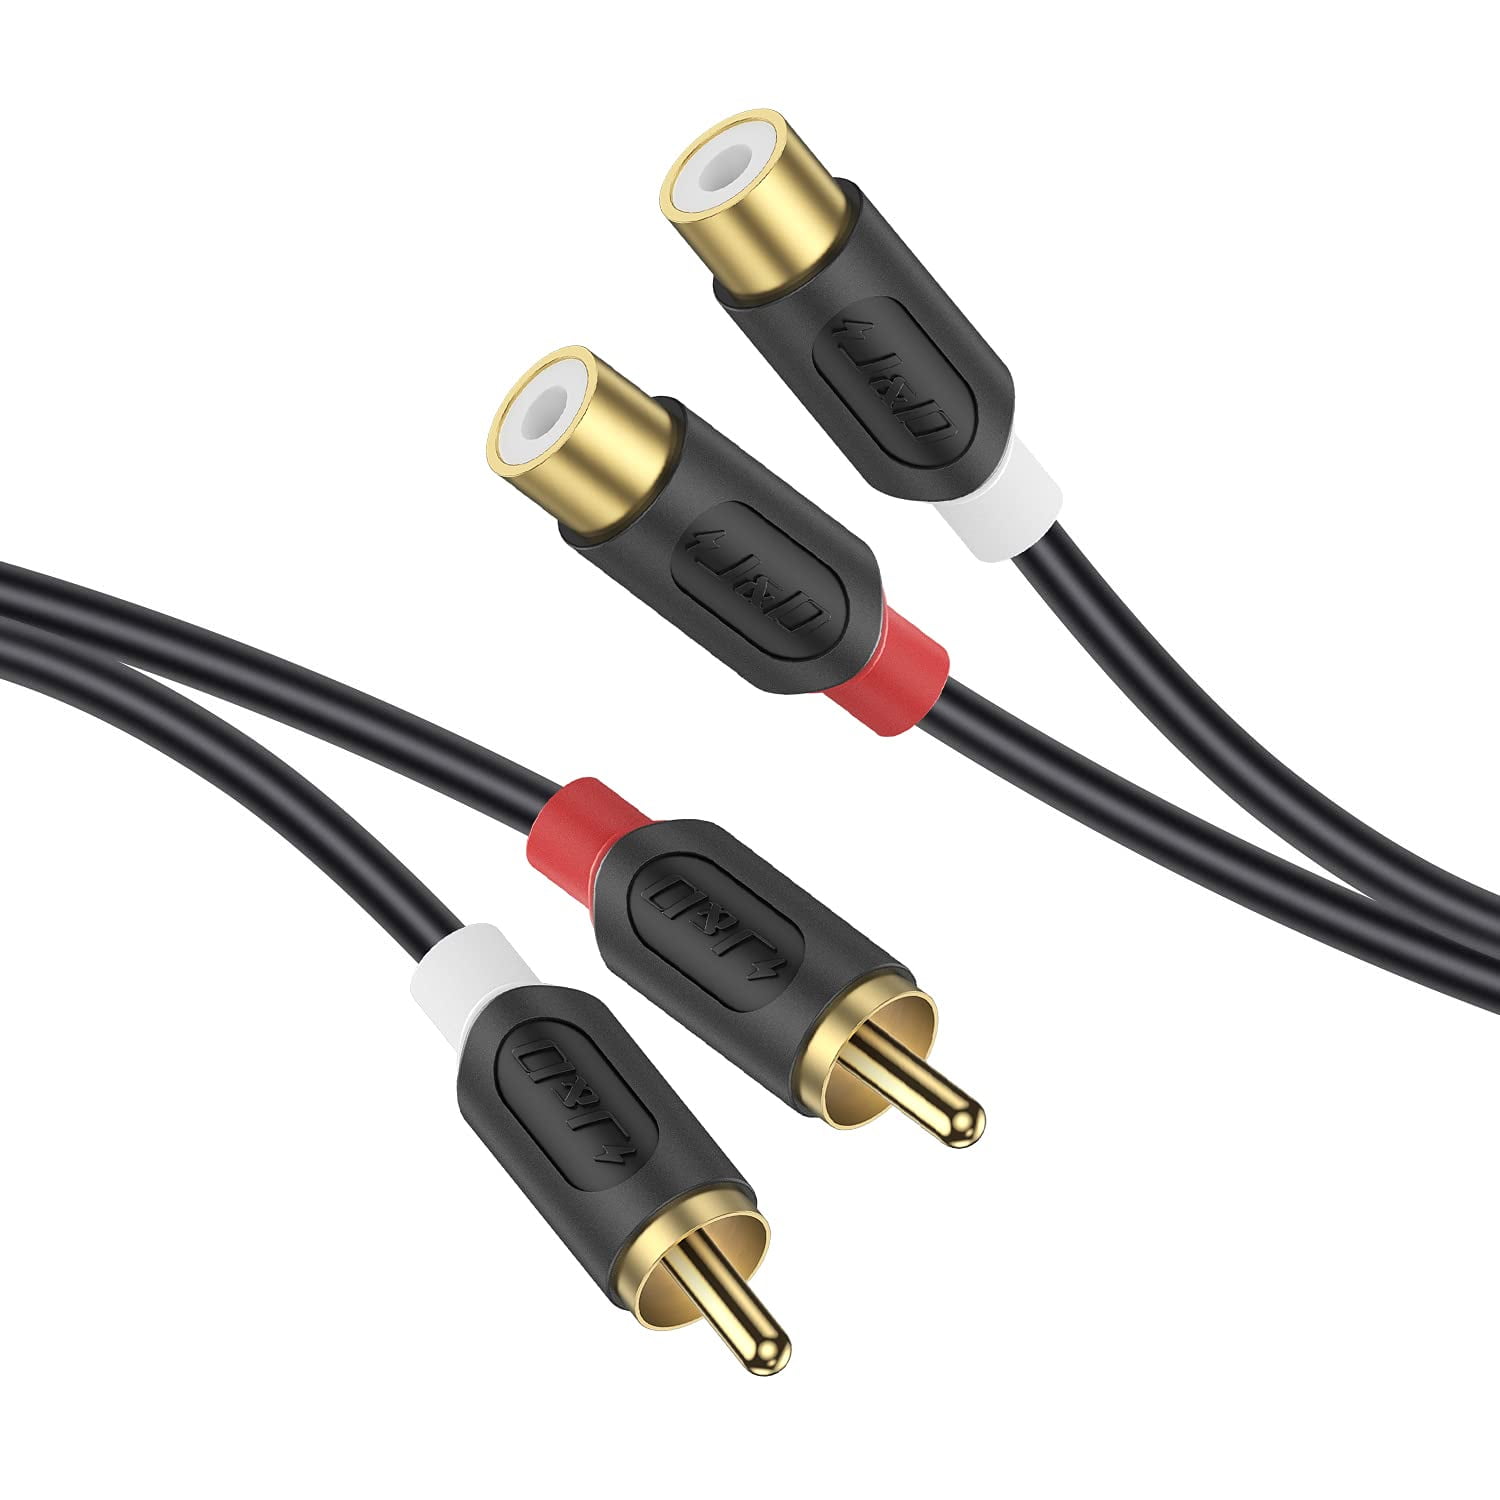 3 Pack Pro Quality 3 Foot 3ft Single RCA Male A/V Cable Shielded SKY71113 x3 